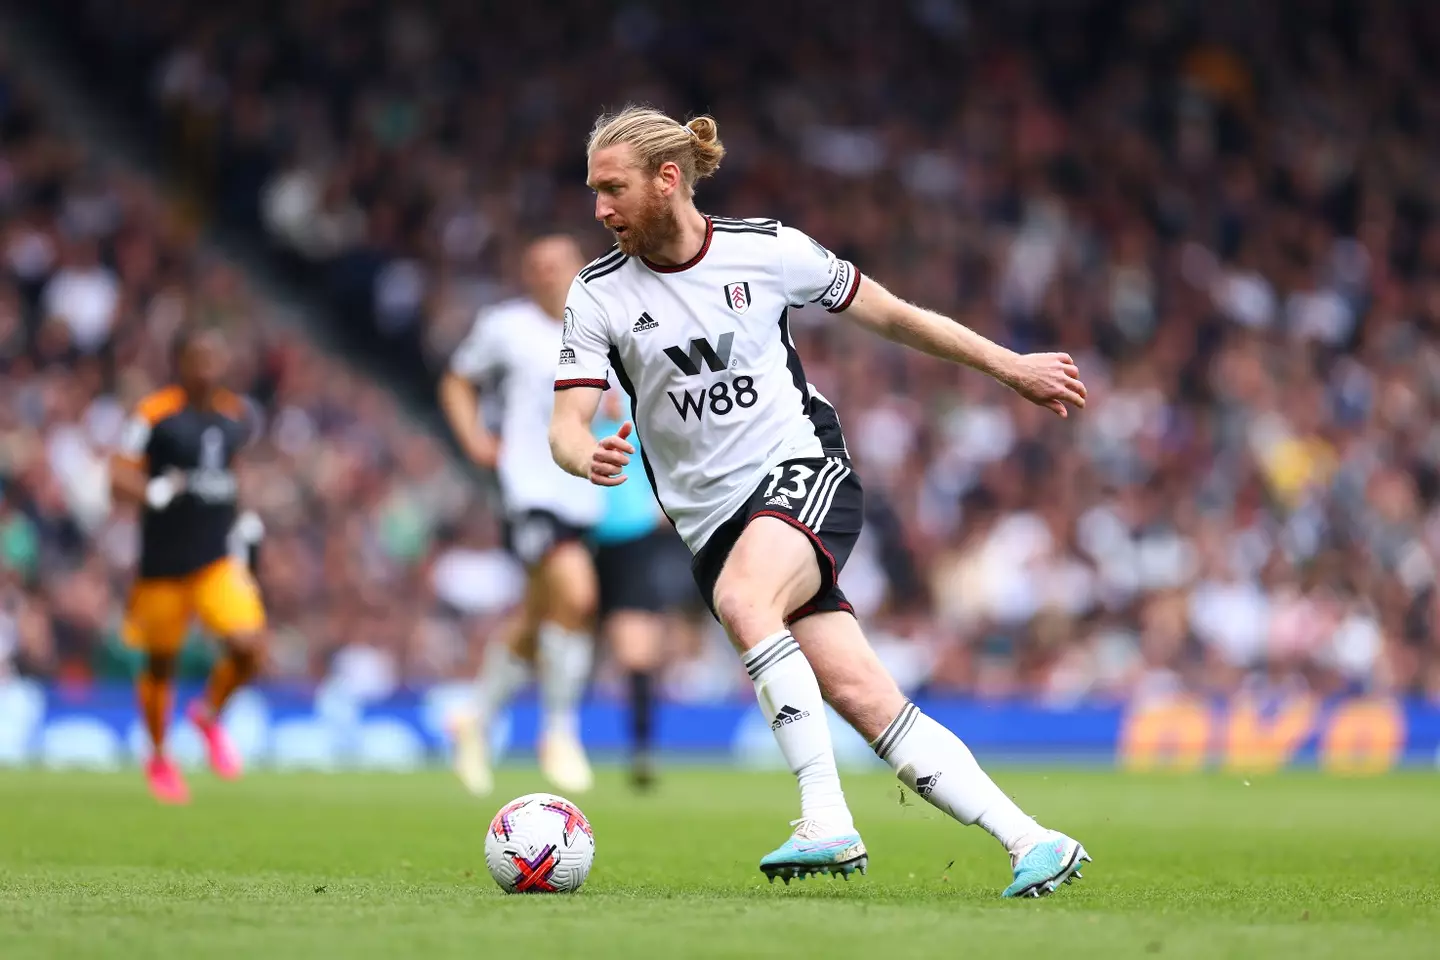 Fulham centre-back Tim Ream in action. Image: Getty